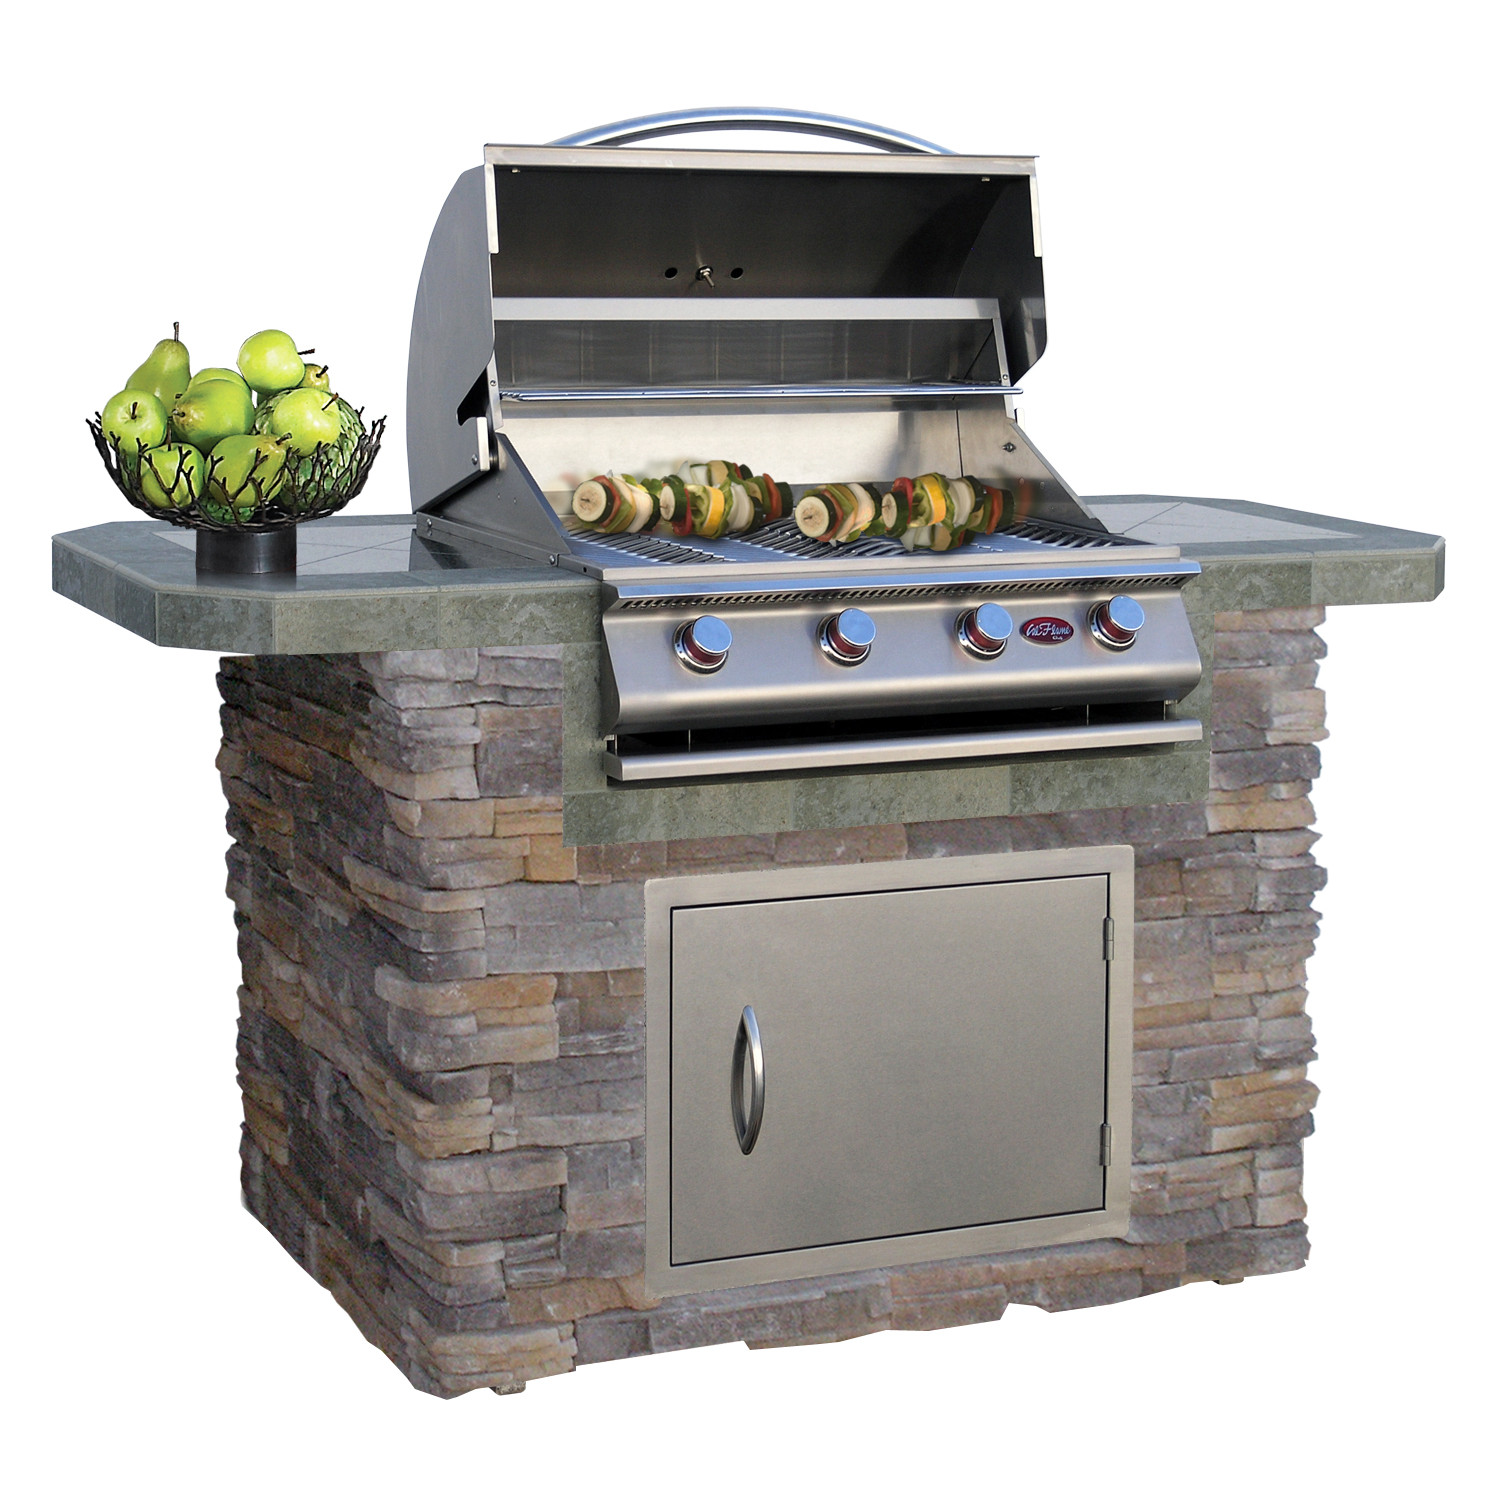 Outdoor Kitchen Grill Island
 Cal Flame 6 Natural Stone and Tile Grill Island with 4